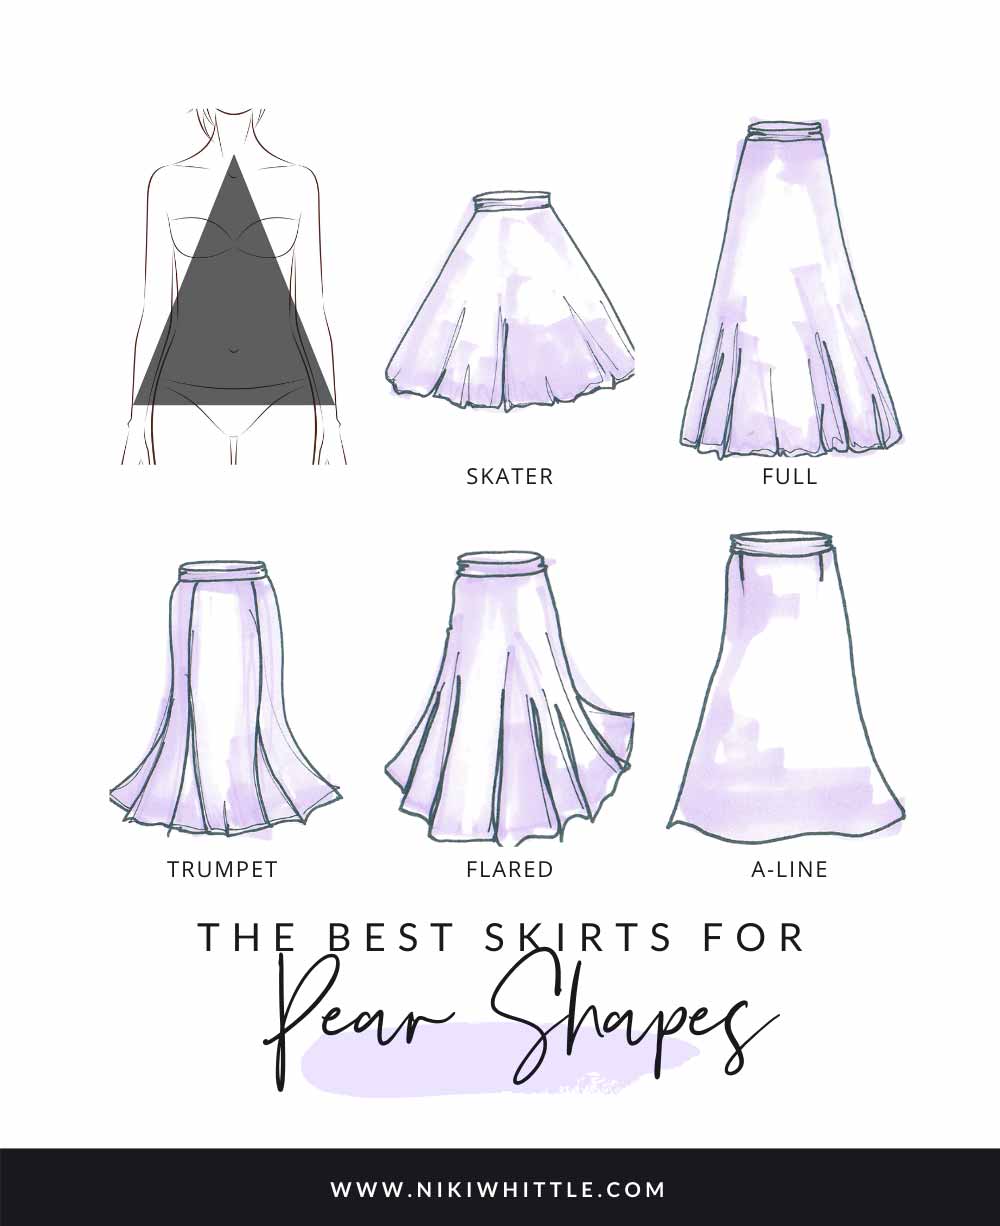 Images of skirts that flatter a pear shape